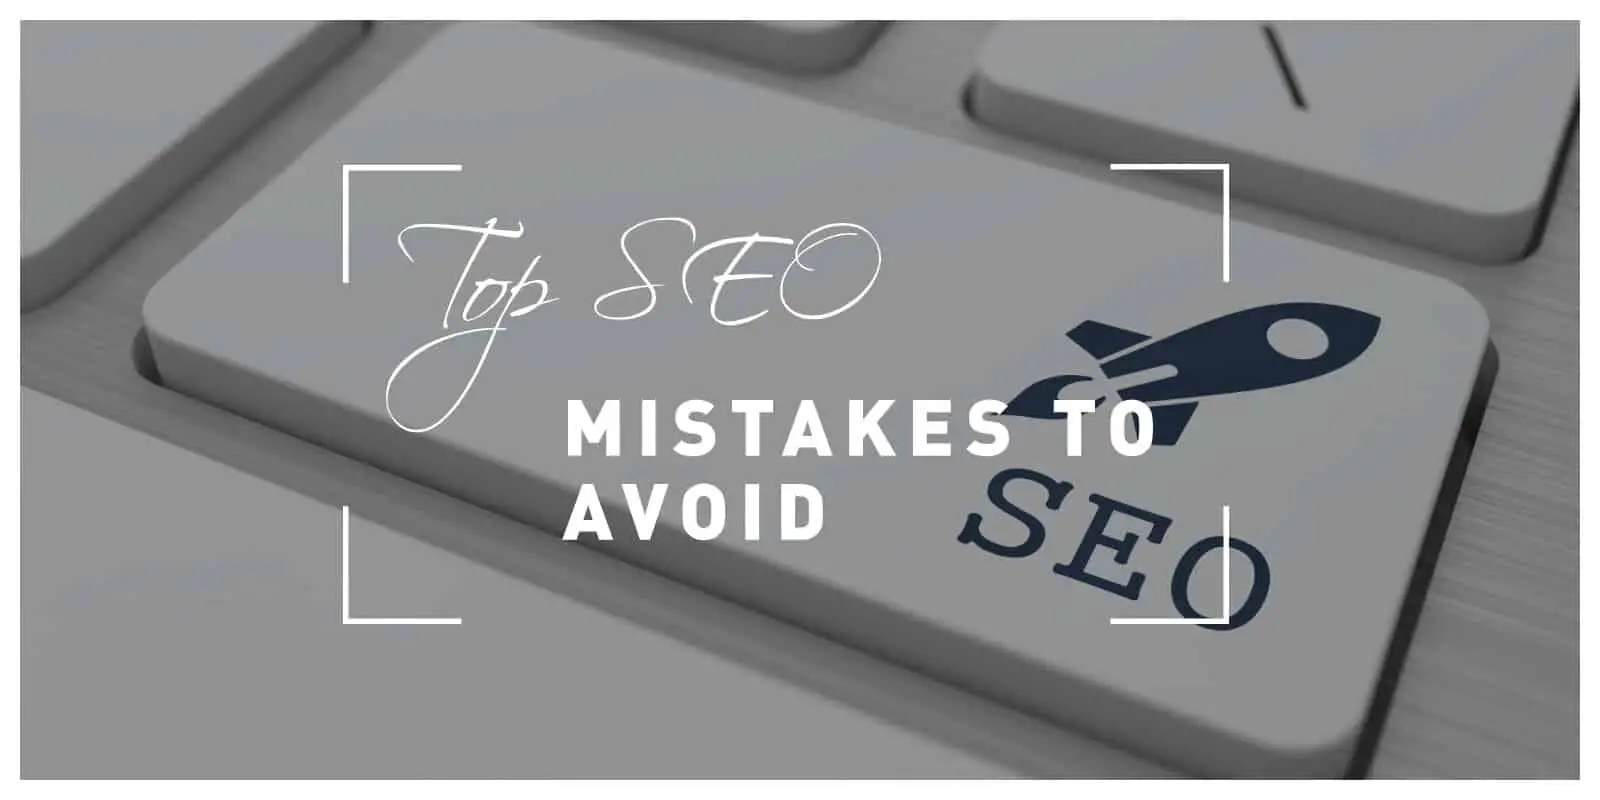 Seo for Dummies: Top Mistakes to Avoid